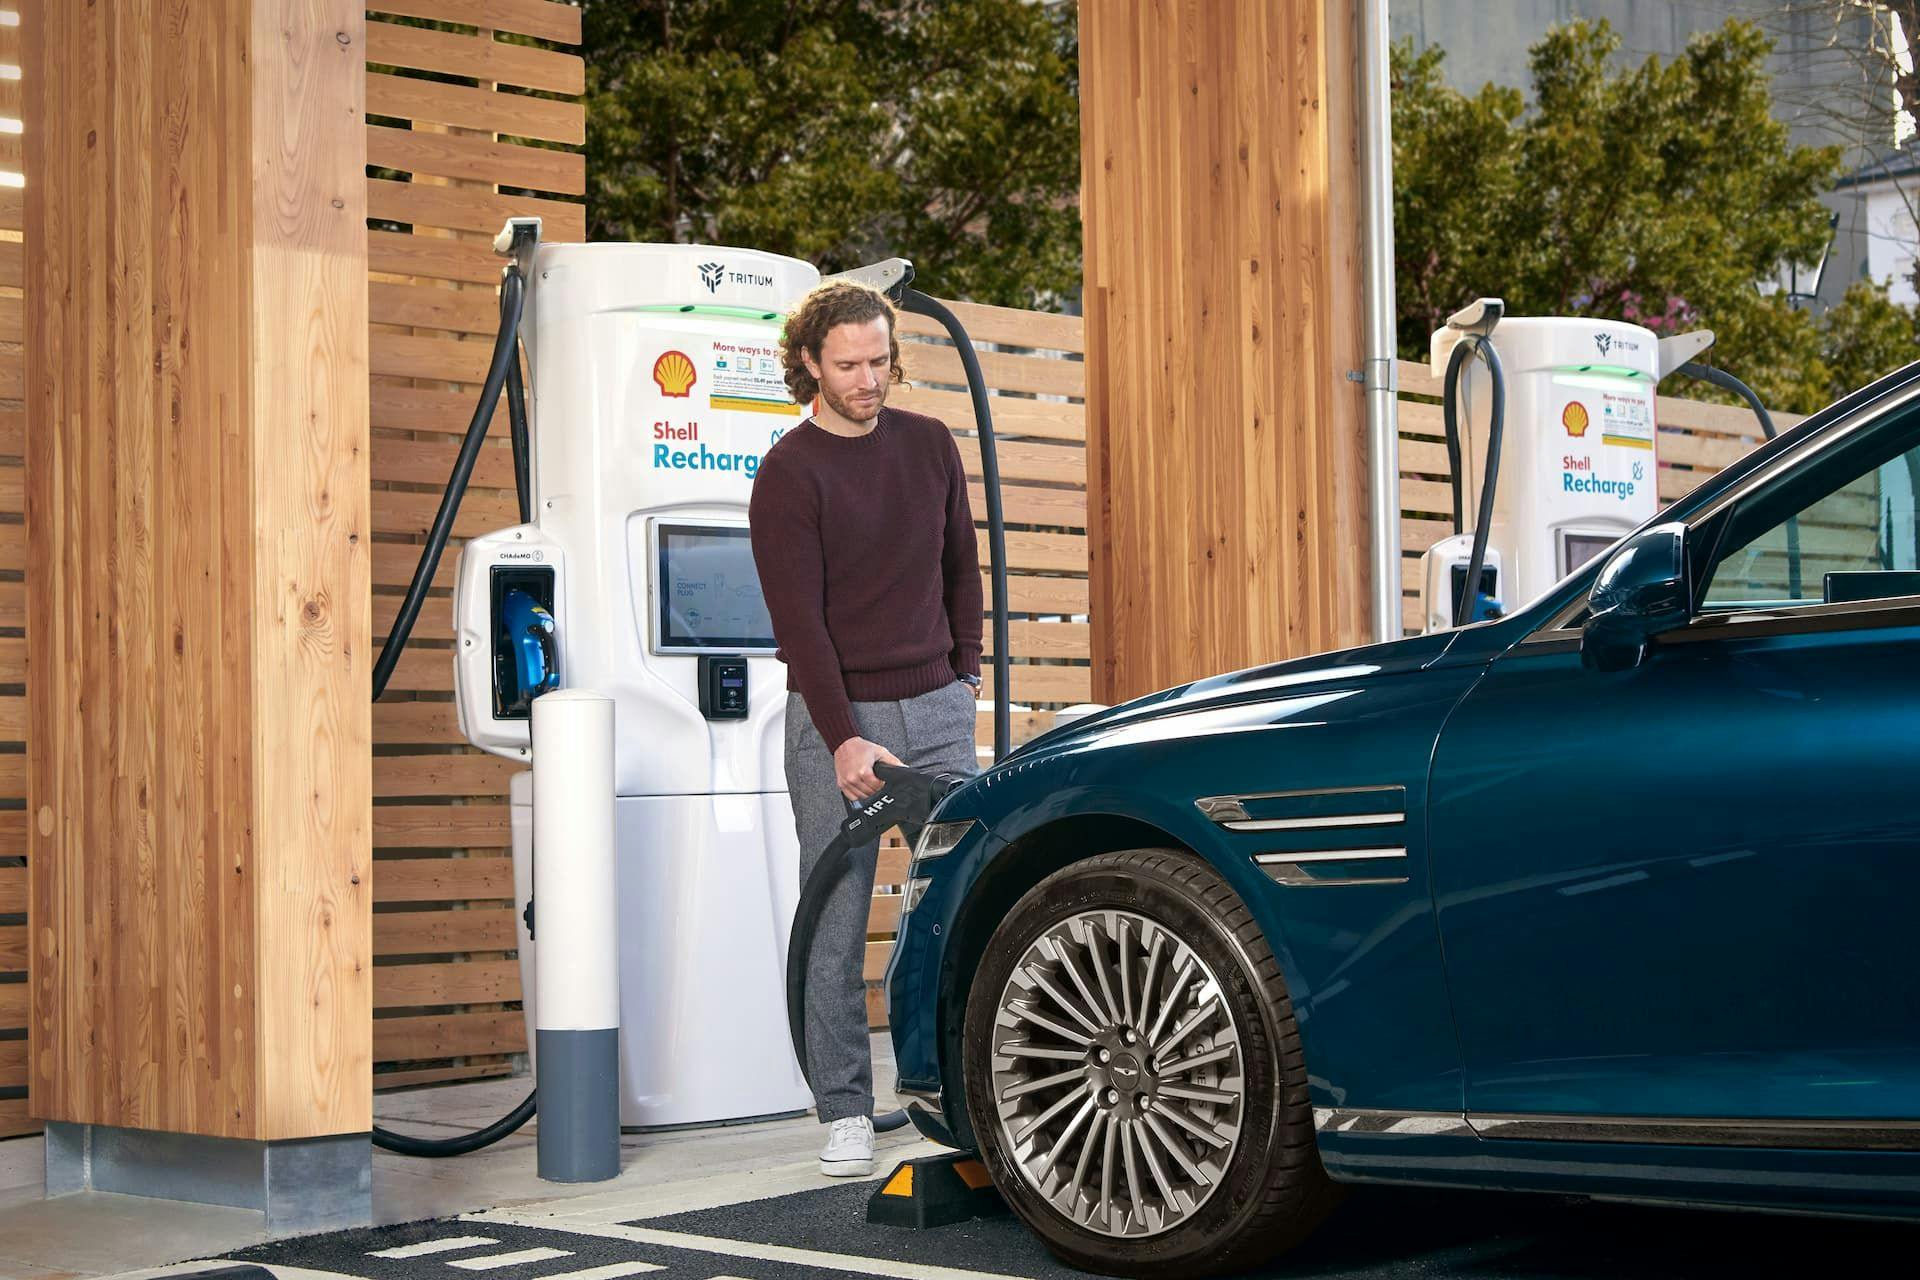 How to use a public EV charging station (step-by-step guide)